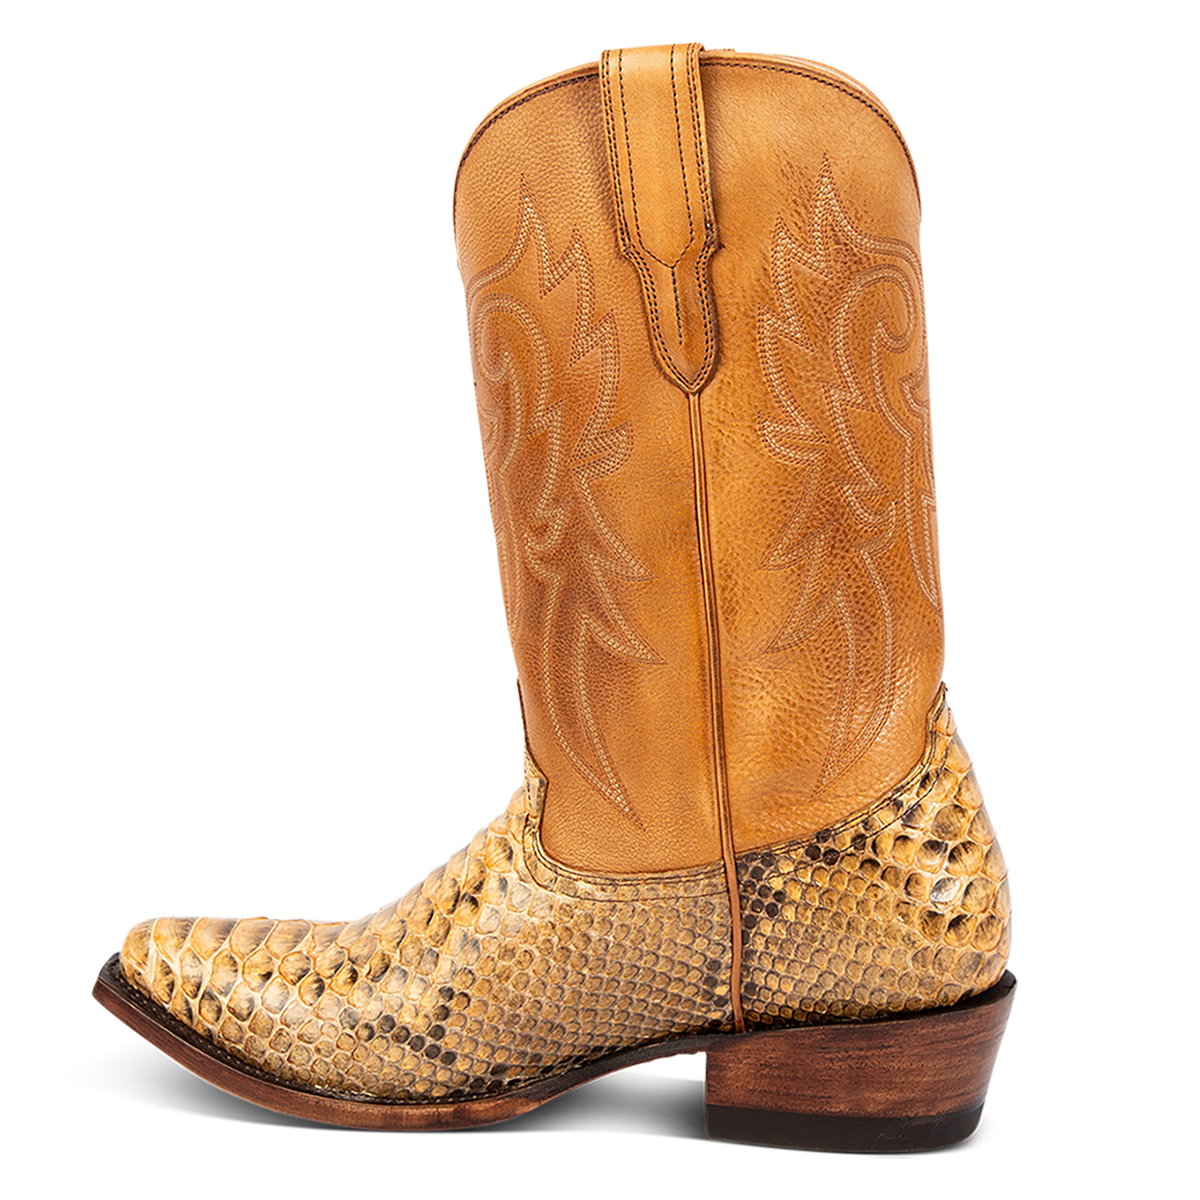 Inside view showing FREEBIRD men's Marshall canary python leather western cowboy boot with shaft stitch detailing, snip toe construction and leather pull straps